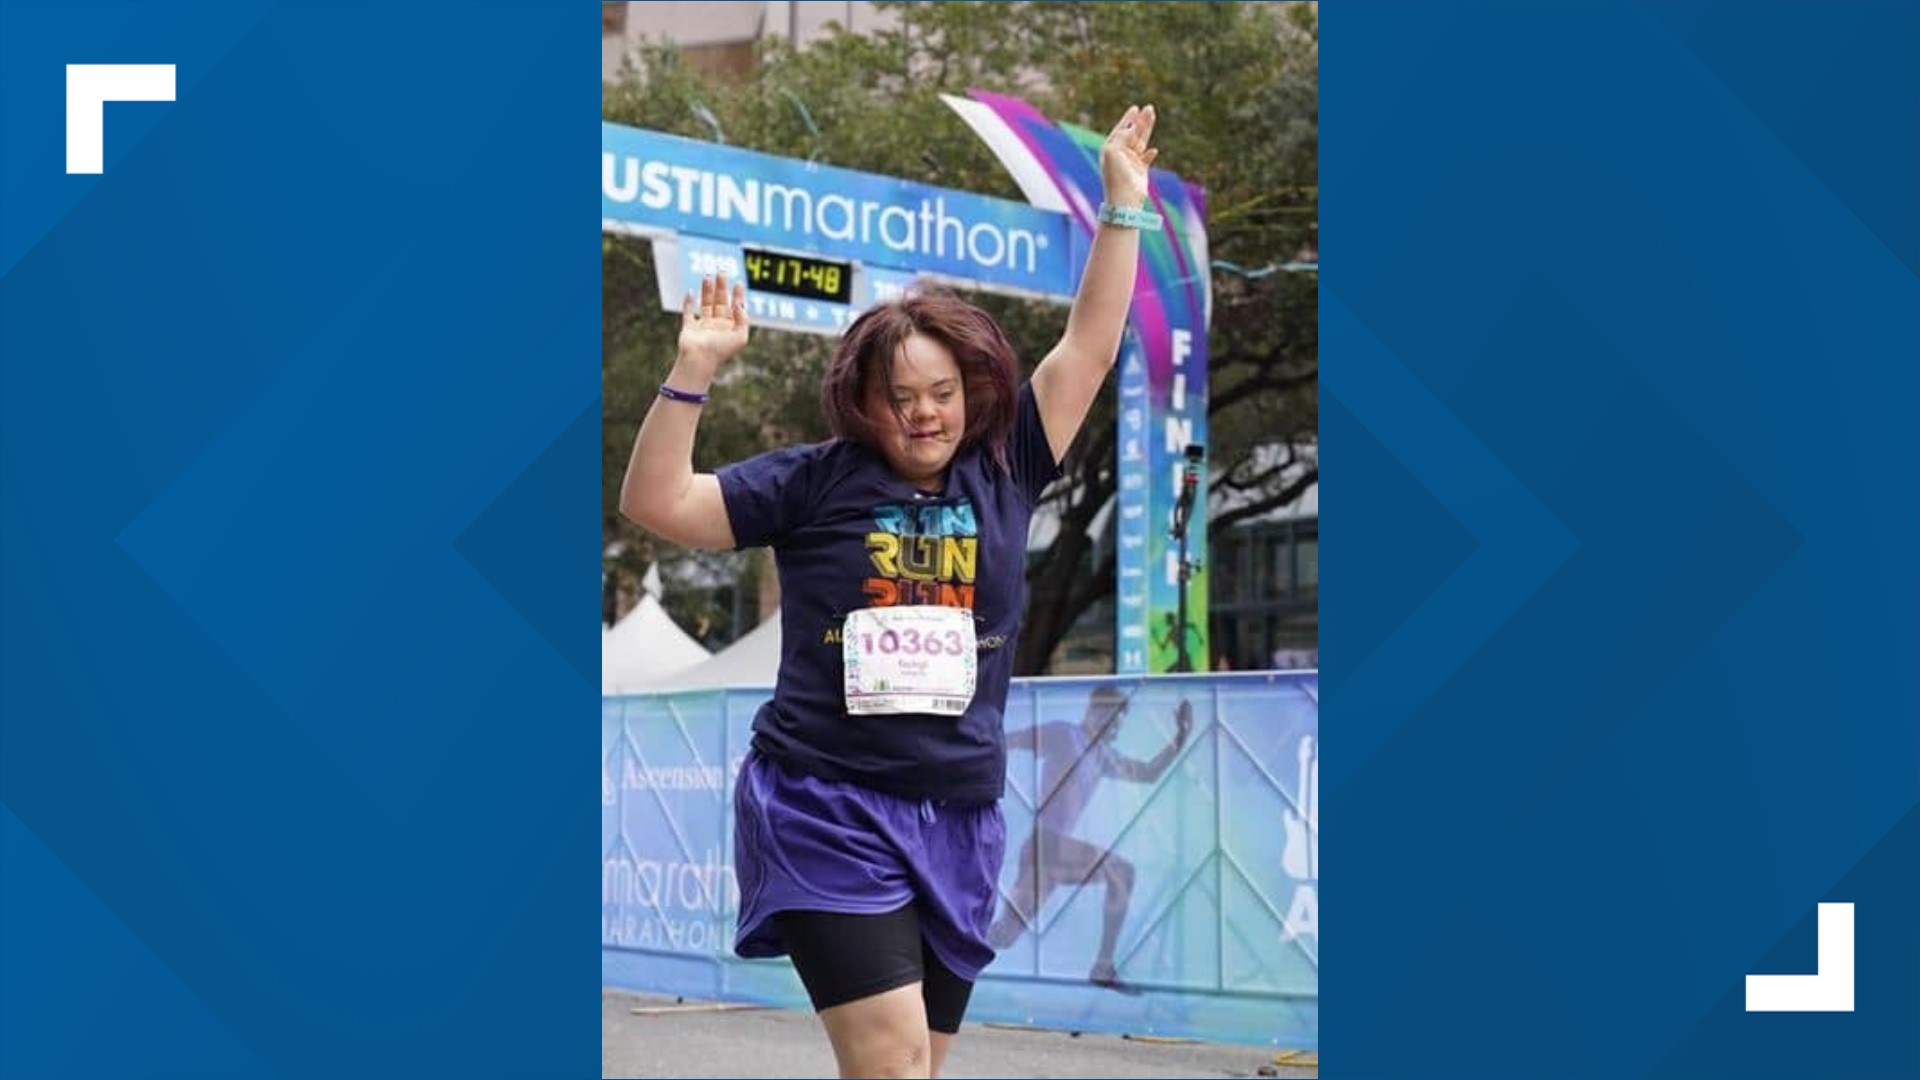 Kayleigh Williamson was chosen by Adidas to run in the Boston Marathon. She will be the second runner with a cognitive disability to participate.